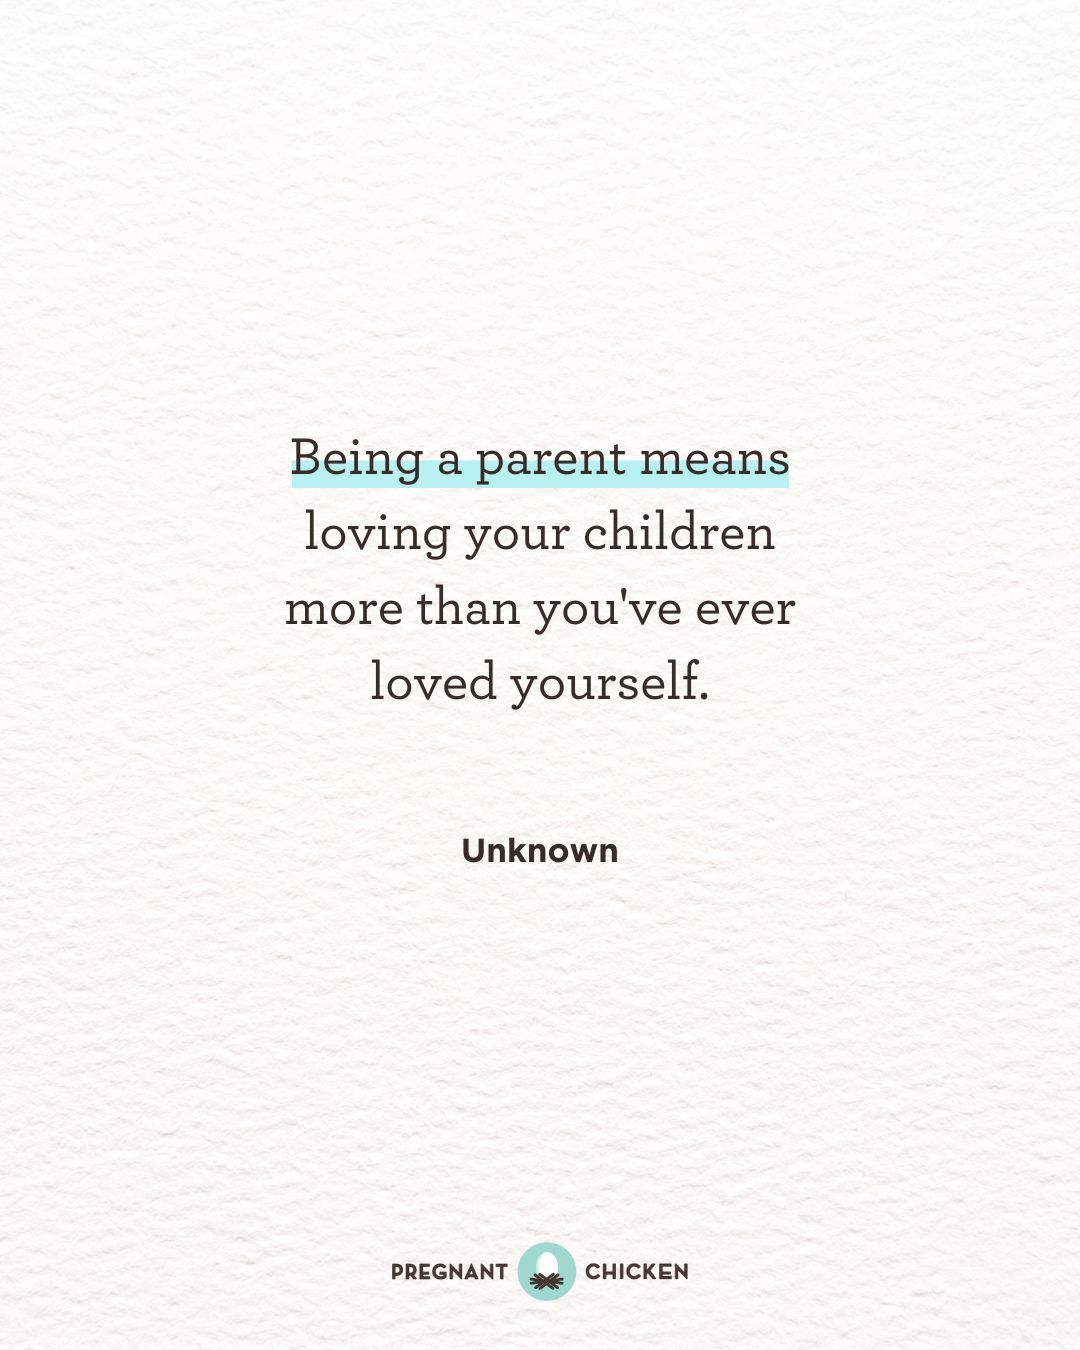 Being a parent means loving your children more than you've ever loved yourself.